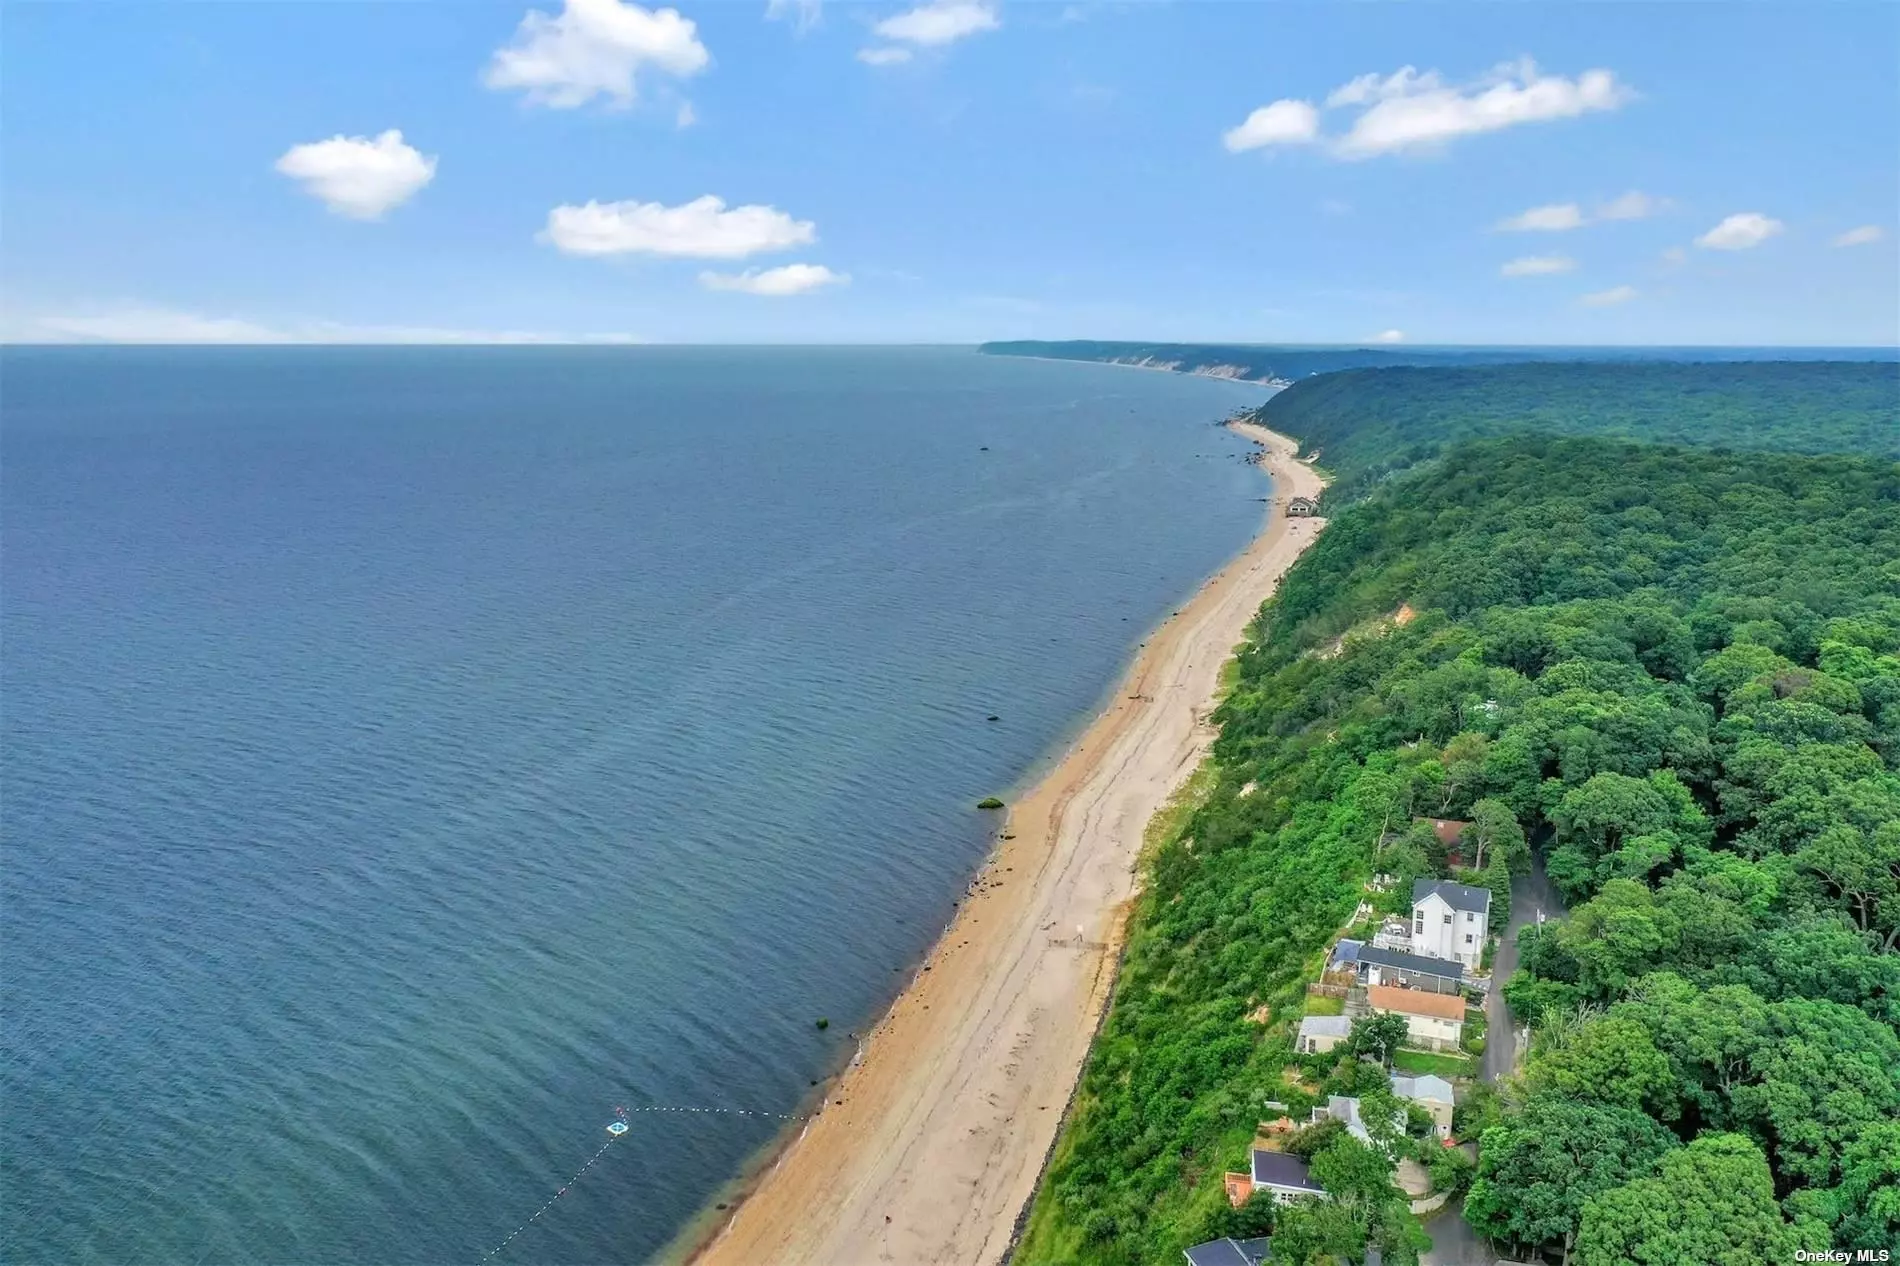 BEAUTIFUL WATERFRONT HOME! Totally renovated 2023. Community steps to private beach adjacent to home. New roof, heating system and central air systems installed 2017. New back yard retaining wall. Beautifully vegetated bluff with beach roses from the top to the beach offers security and stability for years to come. Beach level bulkhead rebuilt with stone toe armor added to prevent erosion.